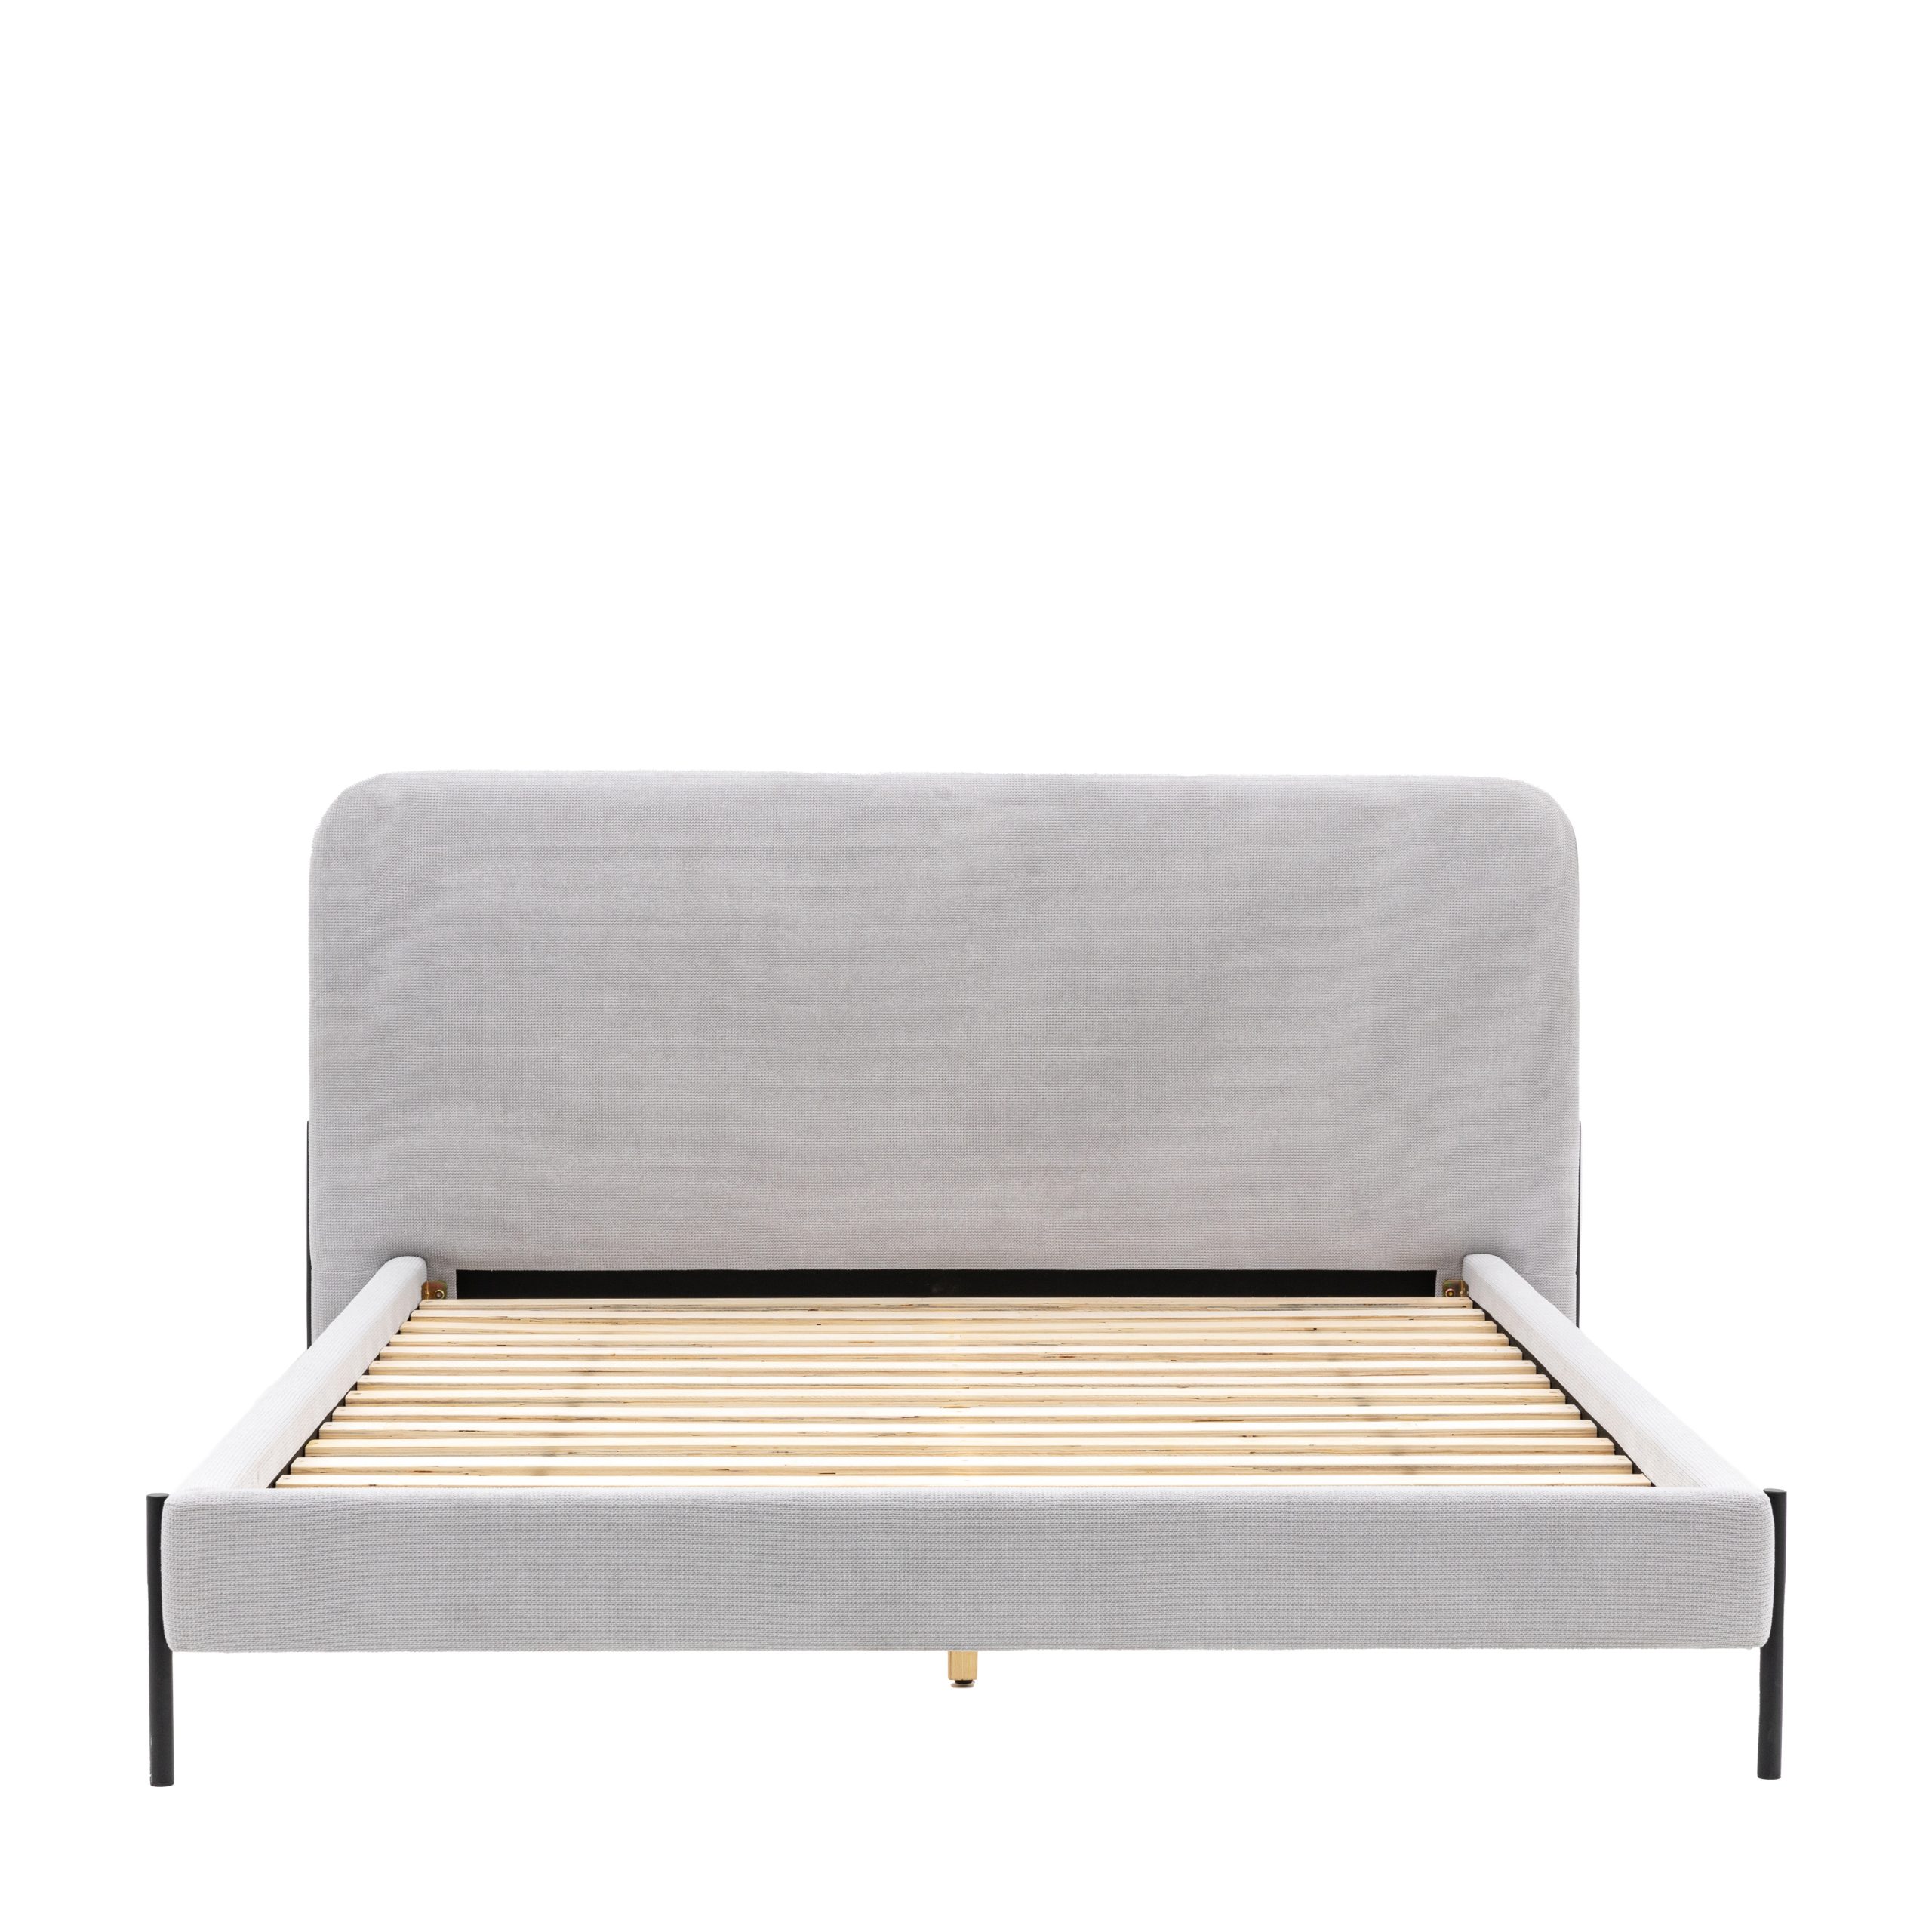 Gallery Direct Oslo 5' Bedstead Natural